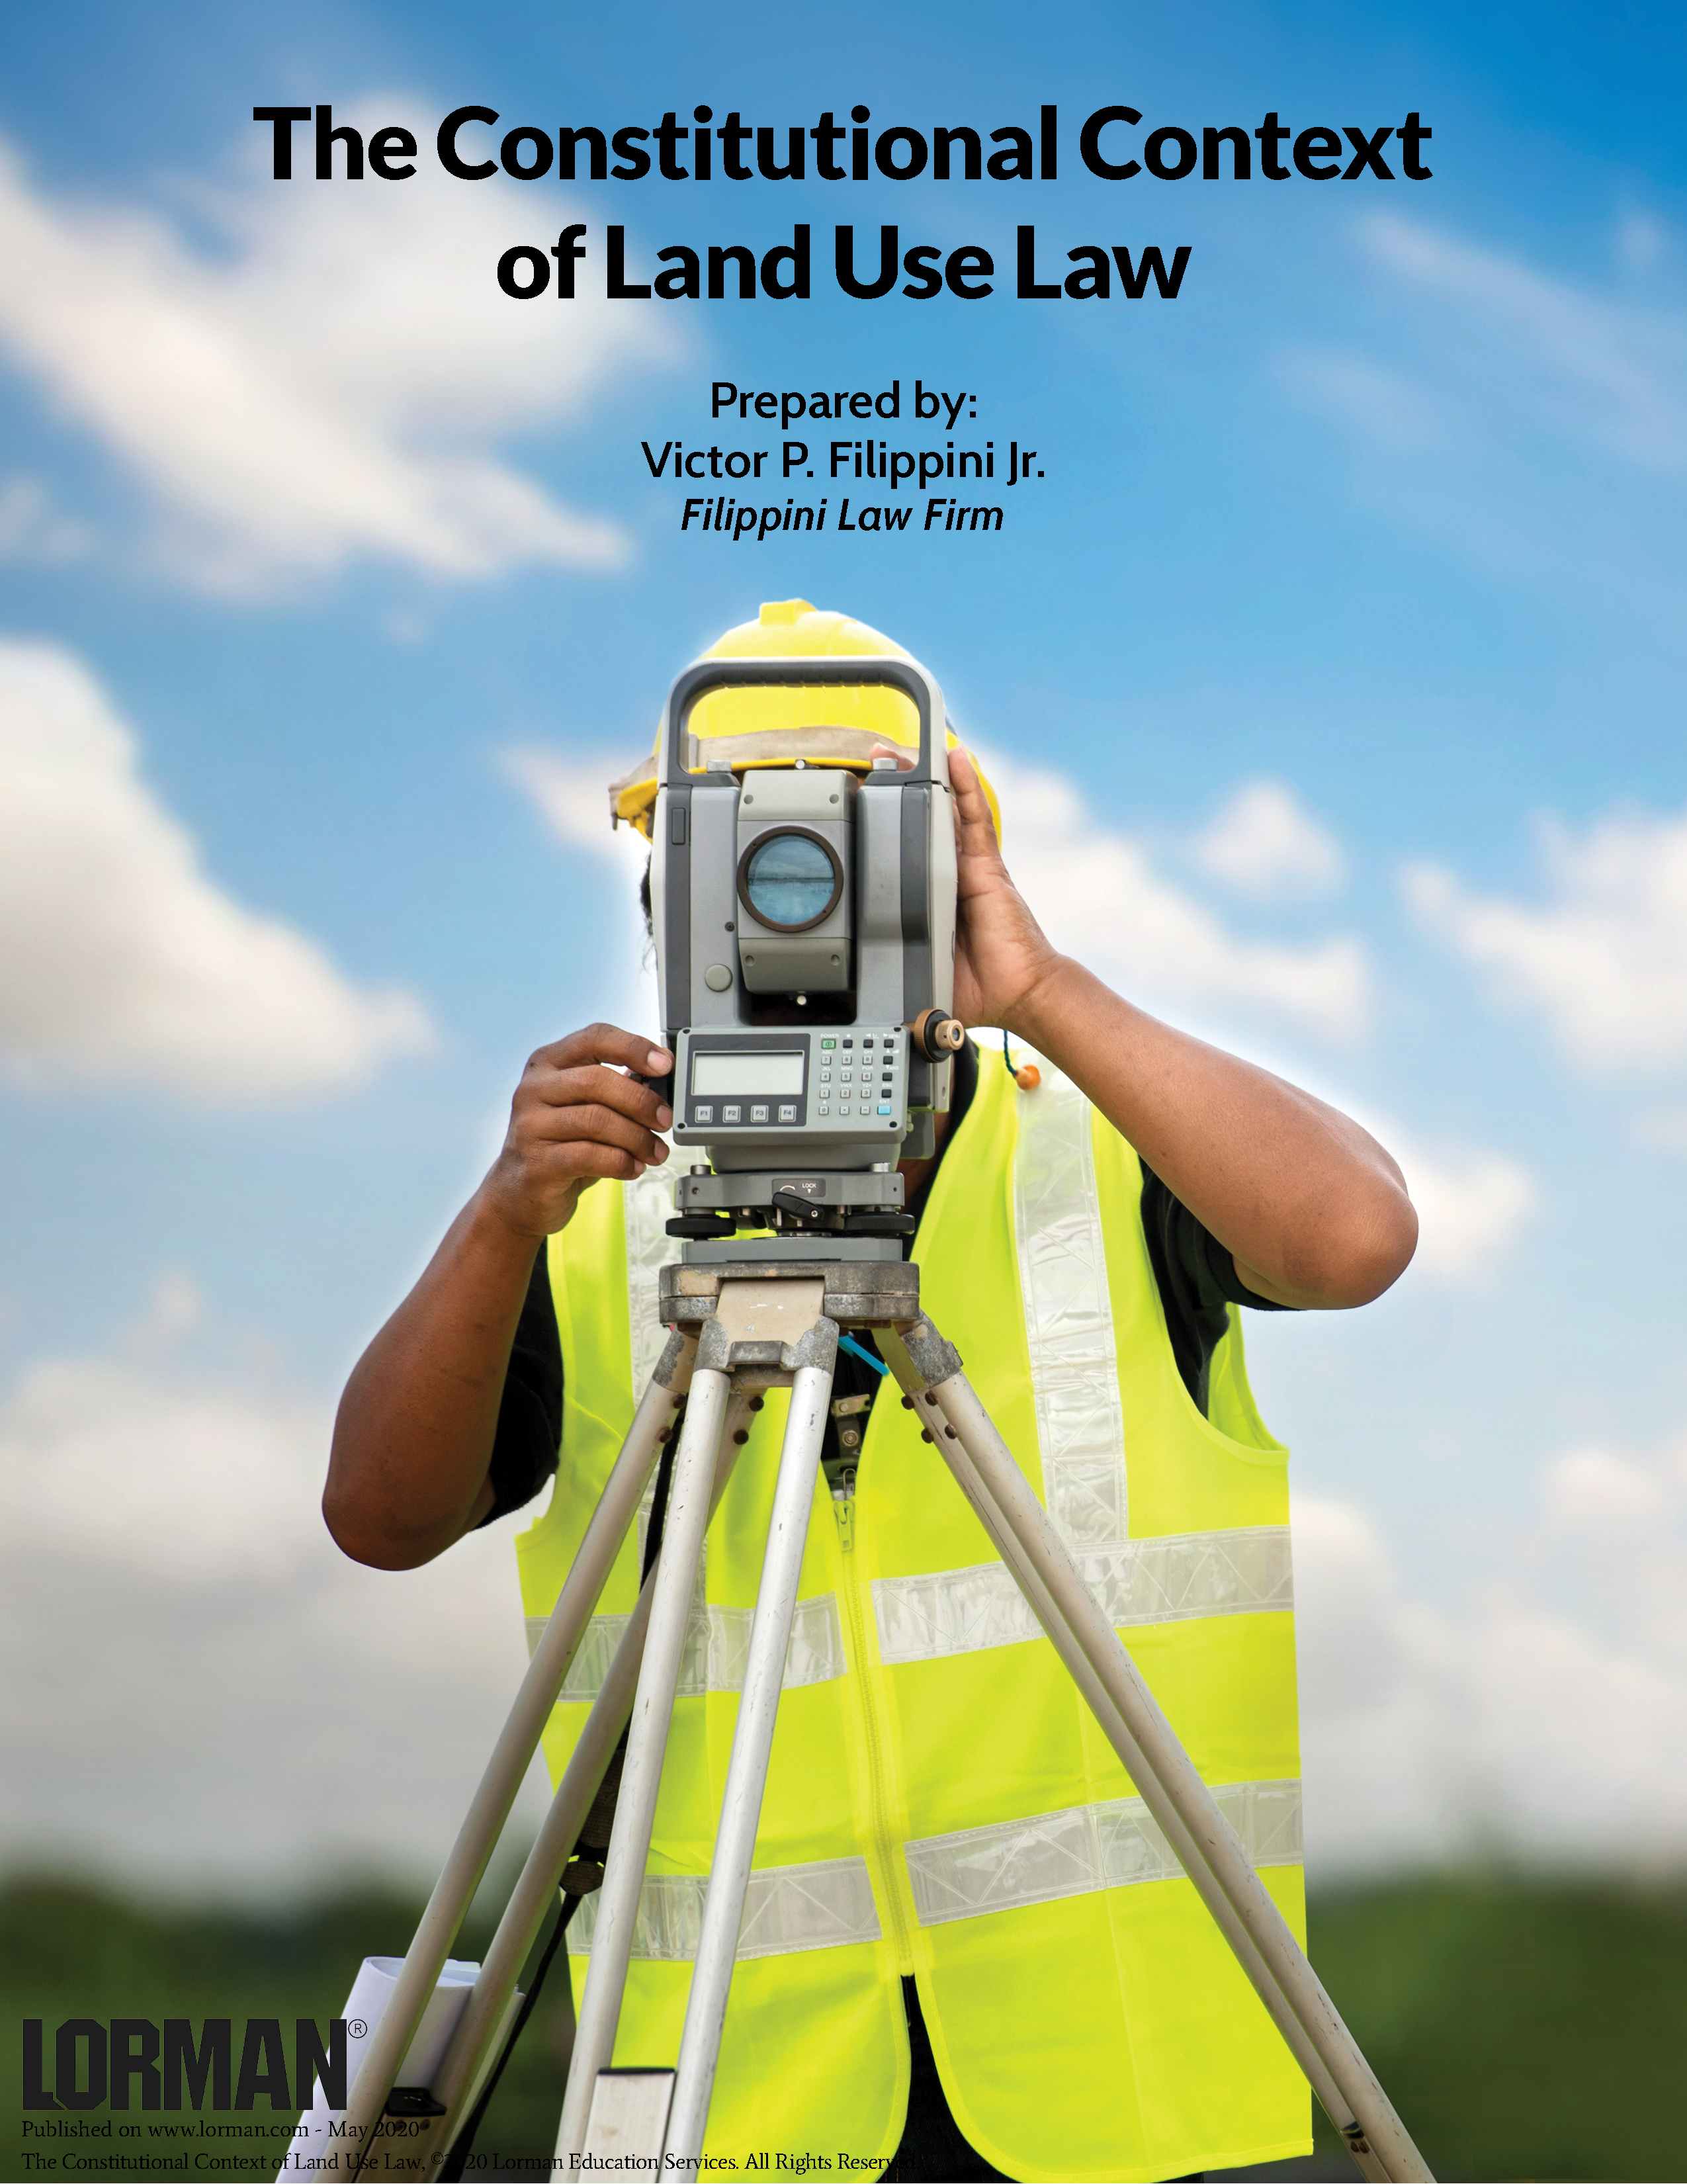 The Constitutional Context of Land Use Law